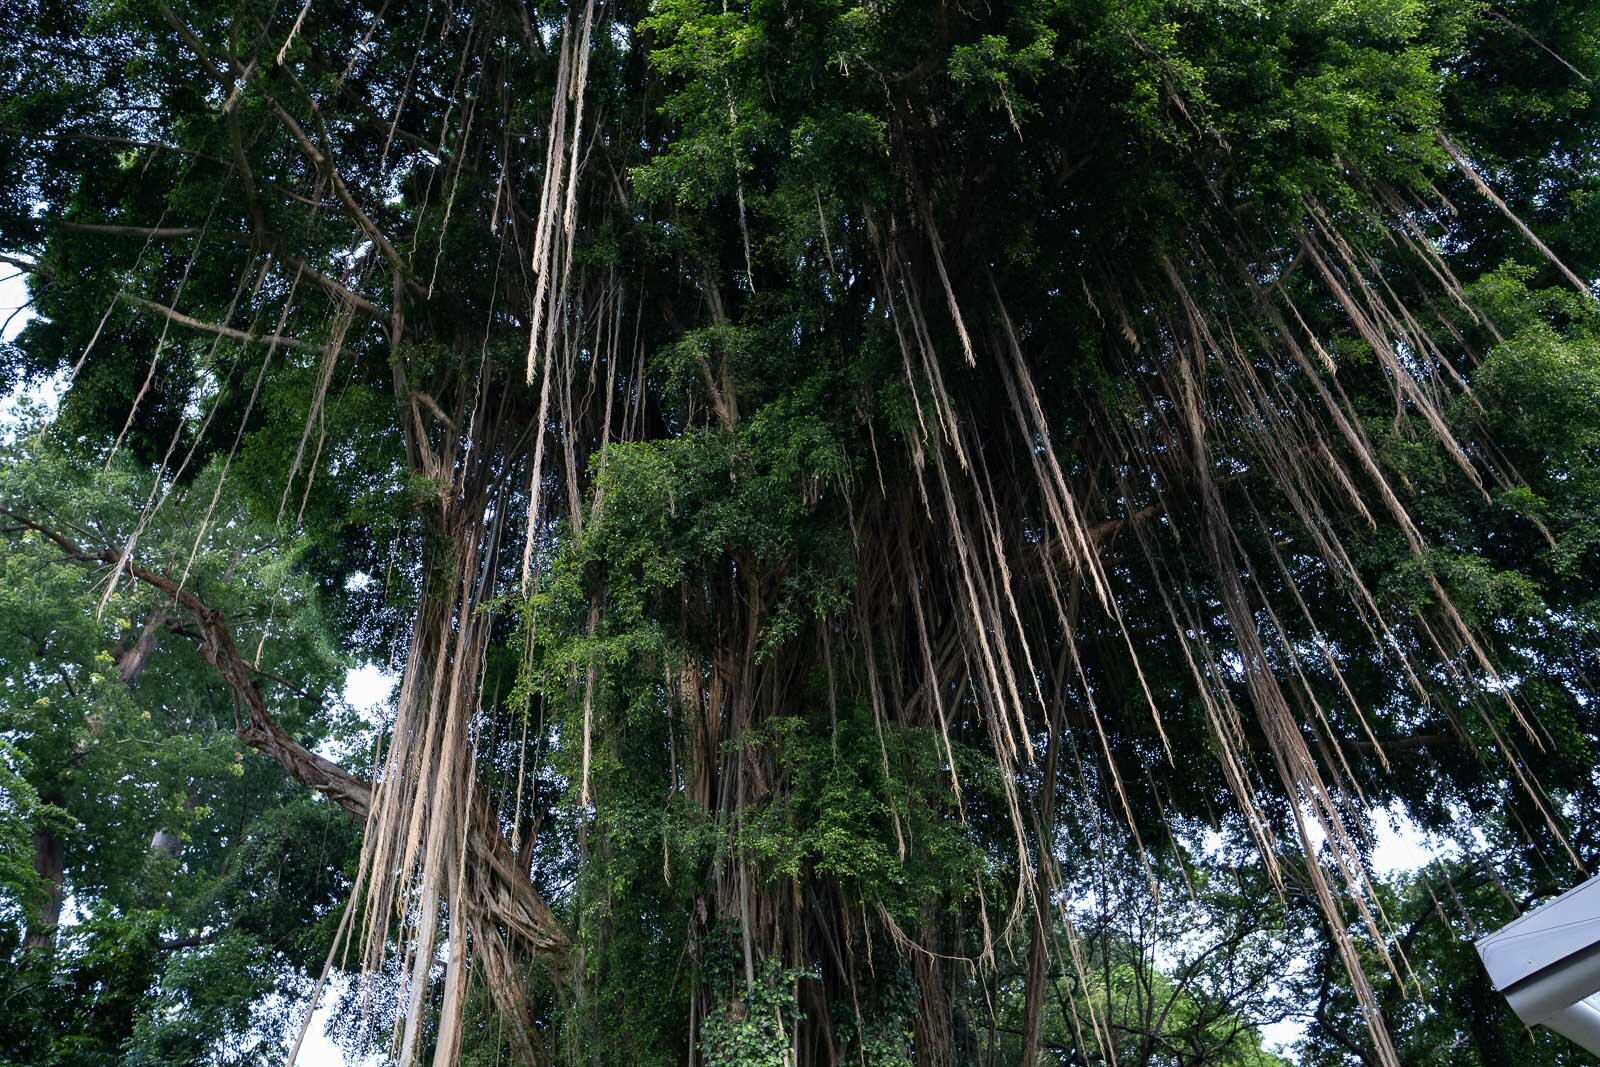 The evergreen Malayan Banyan is welcoming Fort Canning Park visitors with its wide spreading crown and aerial roots hanging down.